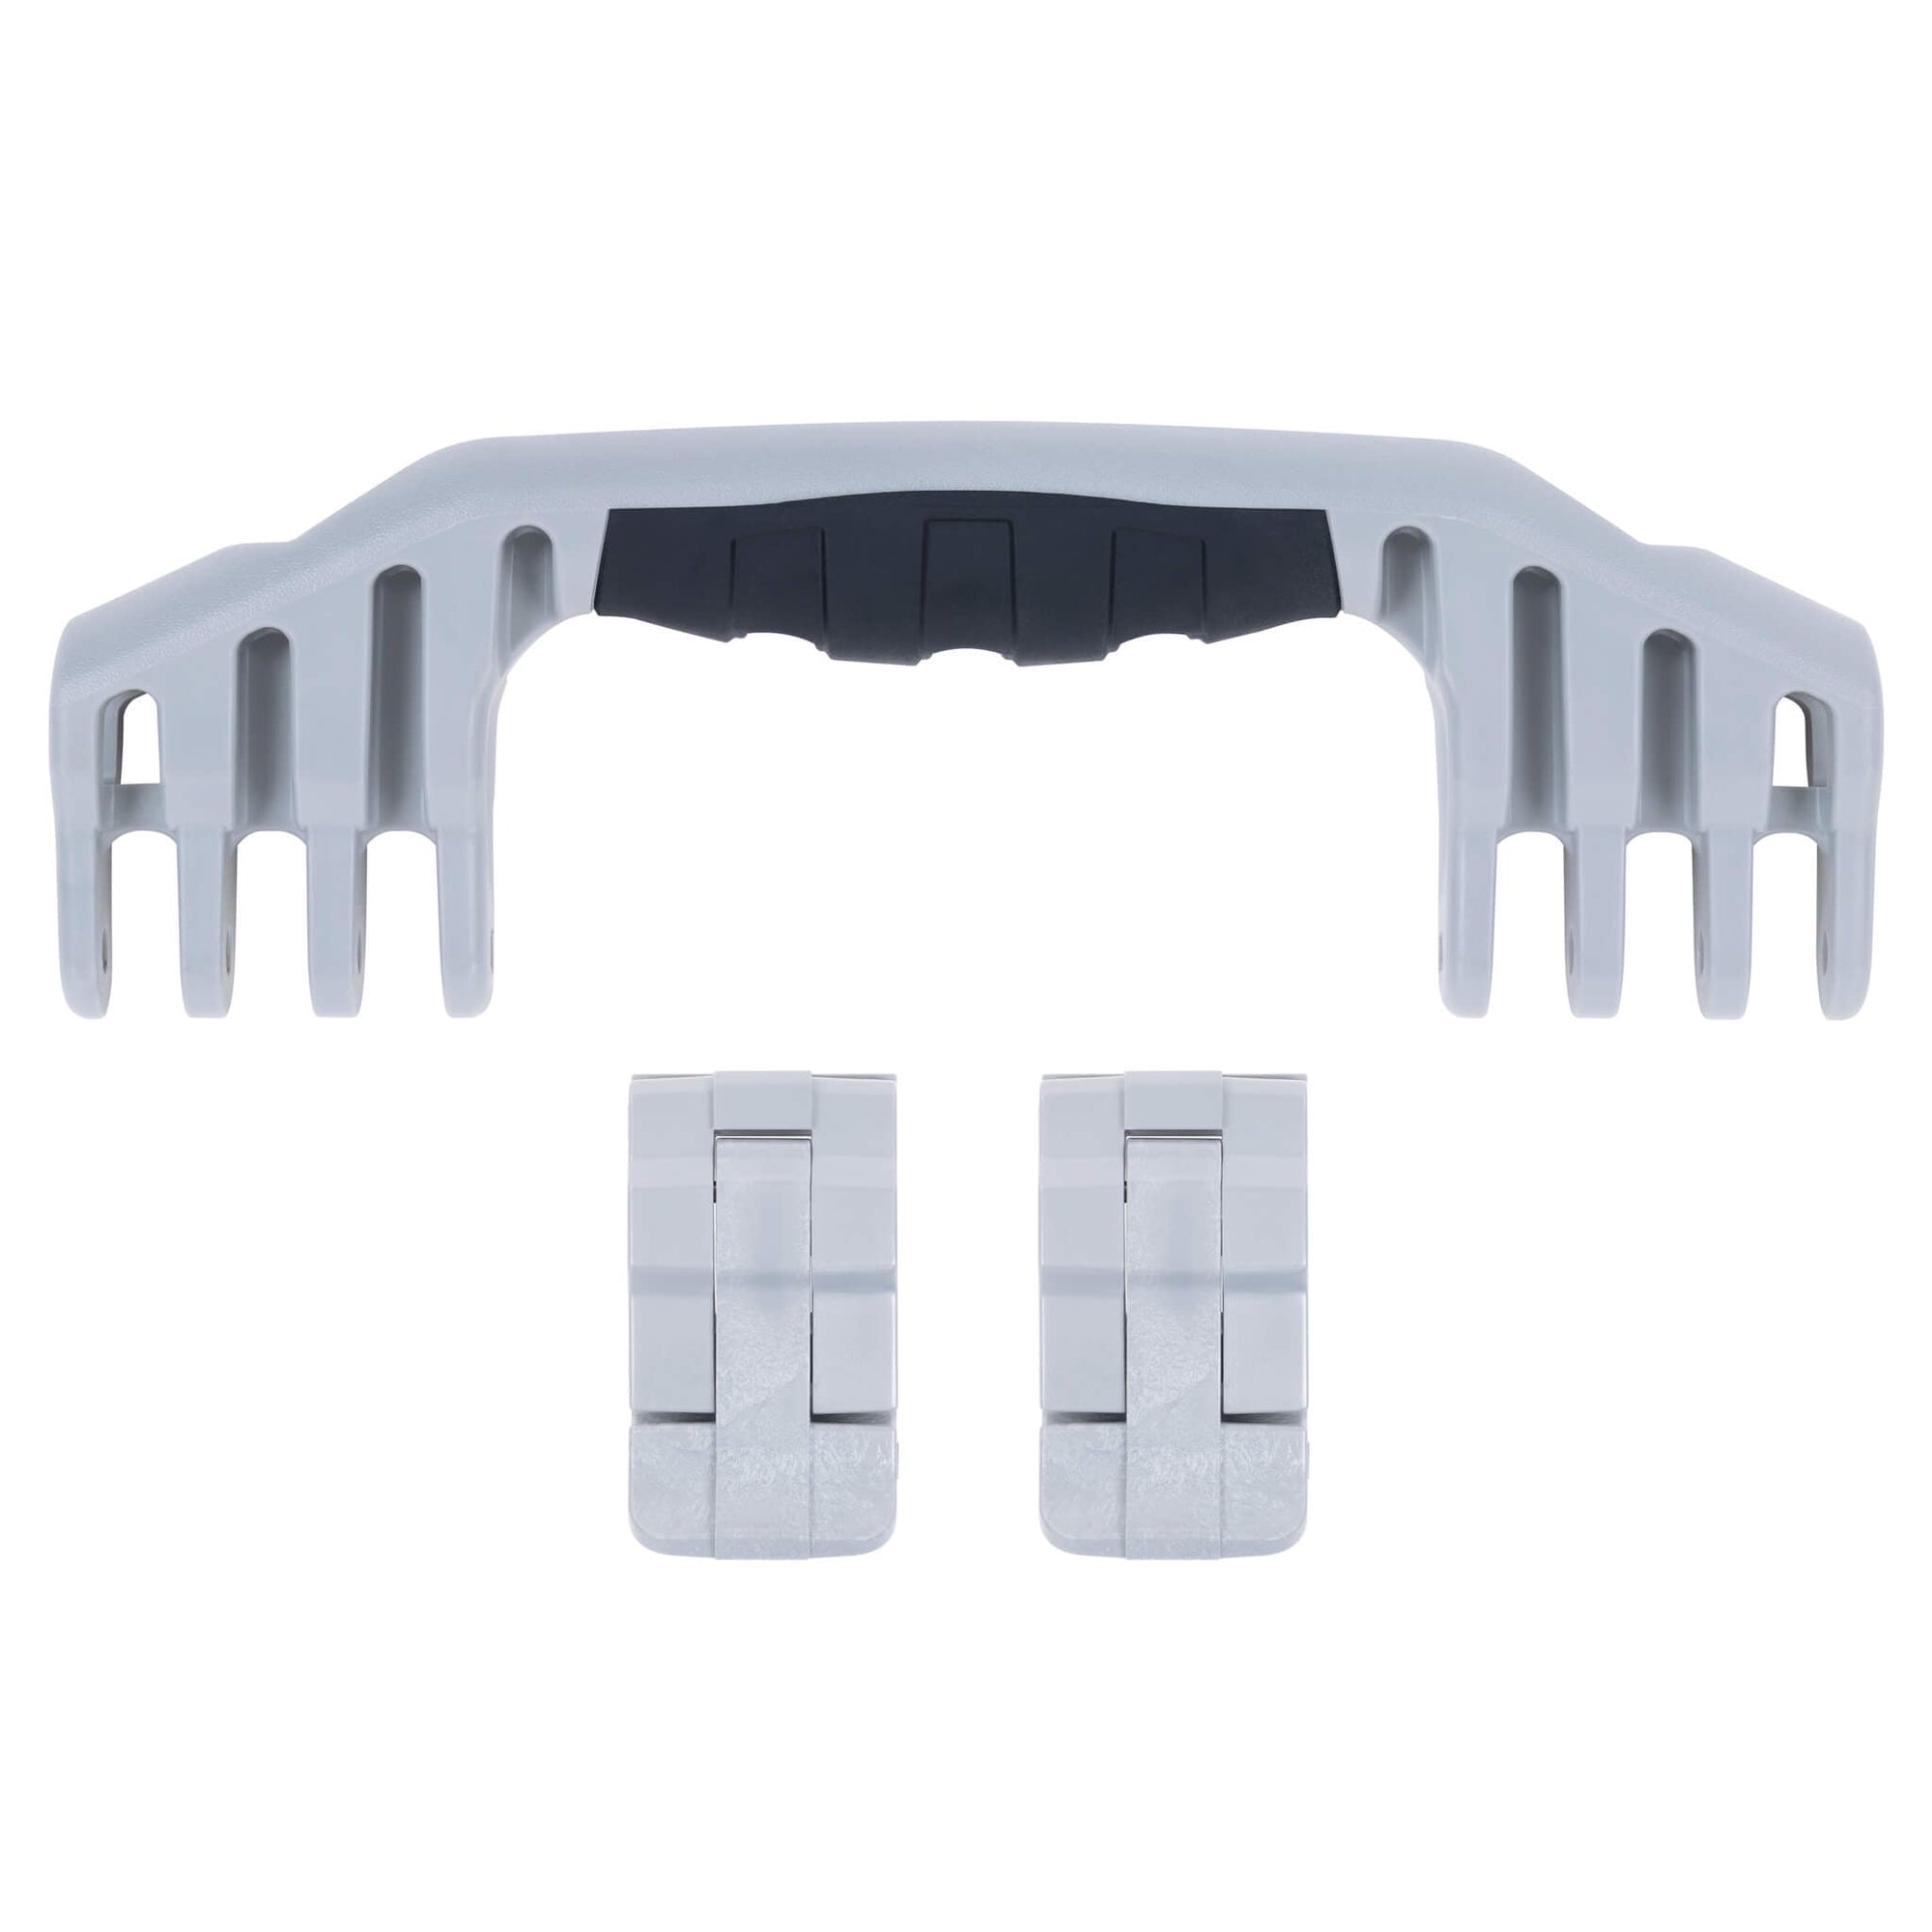 Pelican 1520 Replacement Handle & Latches, Silver (Set of 1 Handle, 2 Latches) ColorCase 